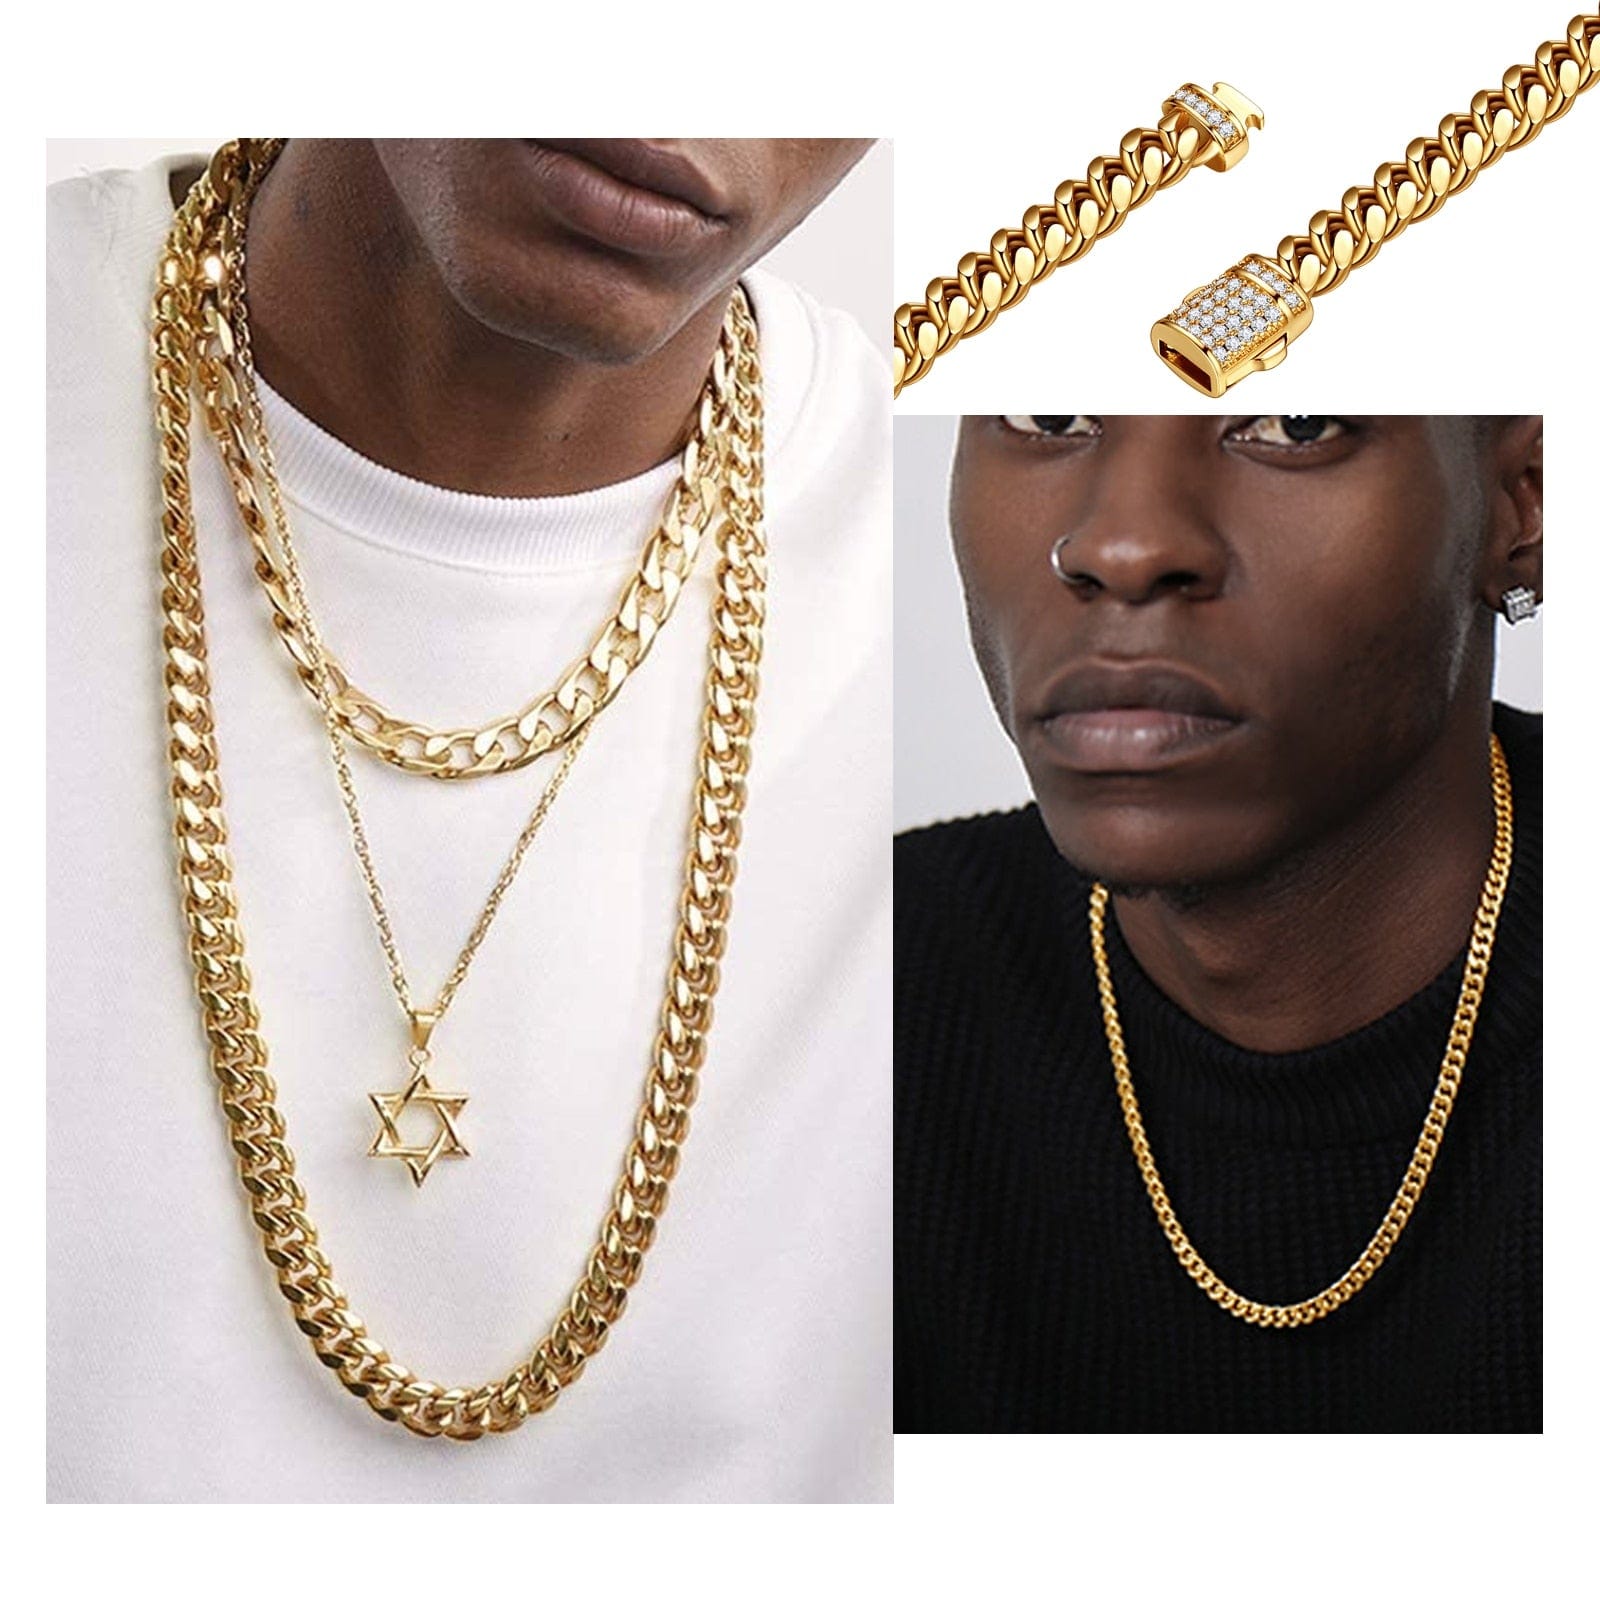 8mm/10mm/12mm/14mm/16mm Stainless Steel Jewelry 18K Gold Plated High  Polished Miami Cuban Link Necklace Men Punk Curb Chain Butterfly Clasp From  Frankie_ngok, $11.09